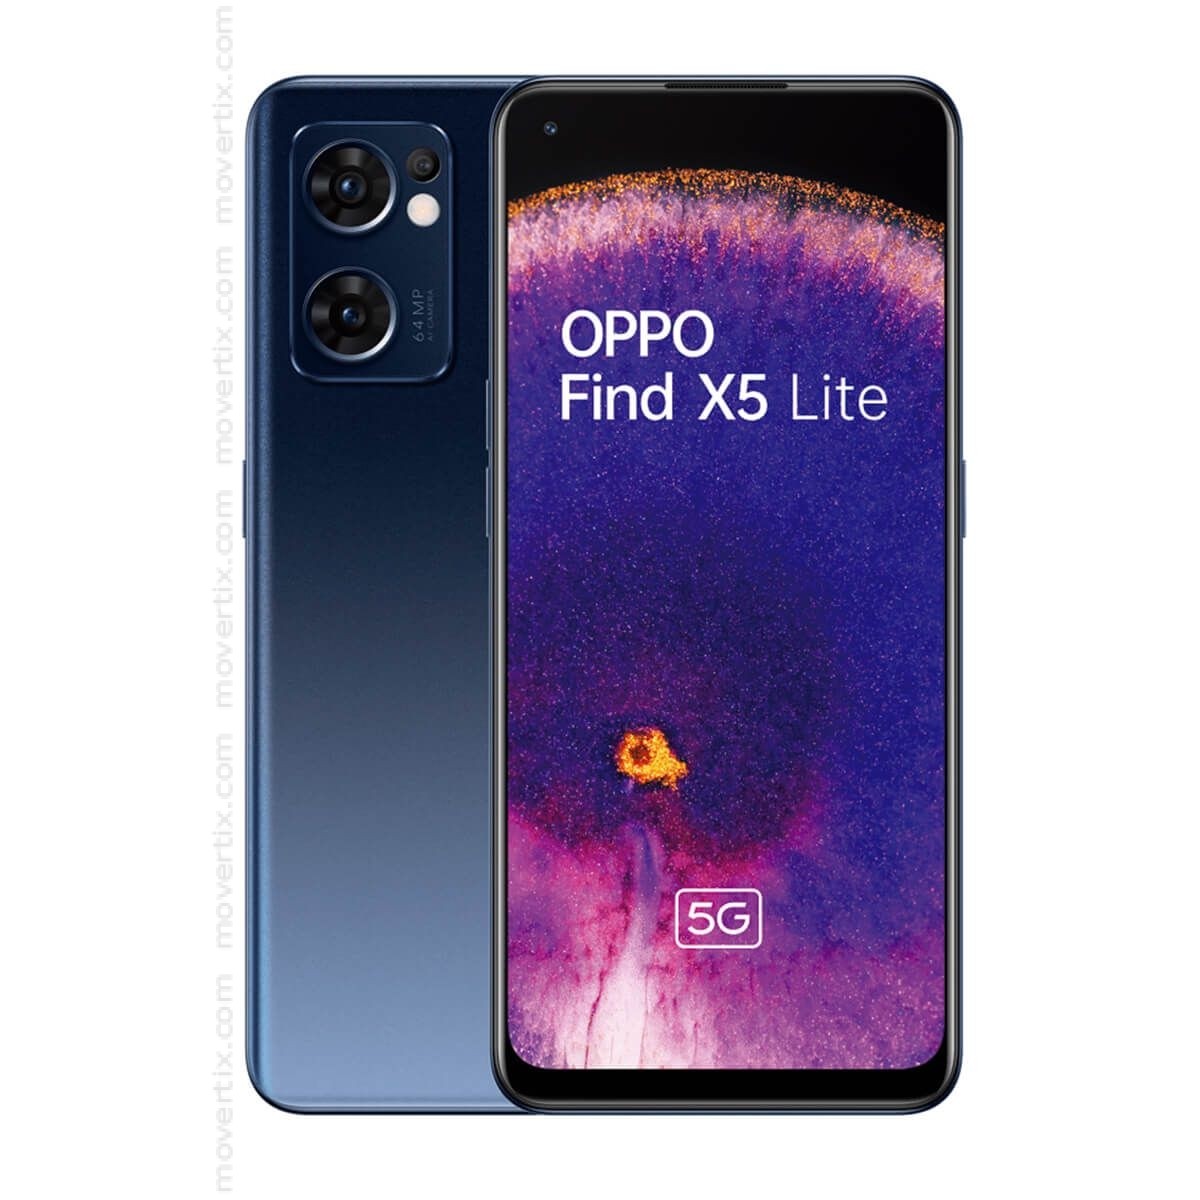 Oppo Find X5 Lite 5G Dual SIM Starry Black 256GB and 8GB RAM - CPH2371  (6932169301930) | Movertix Mobile Phones Shop